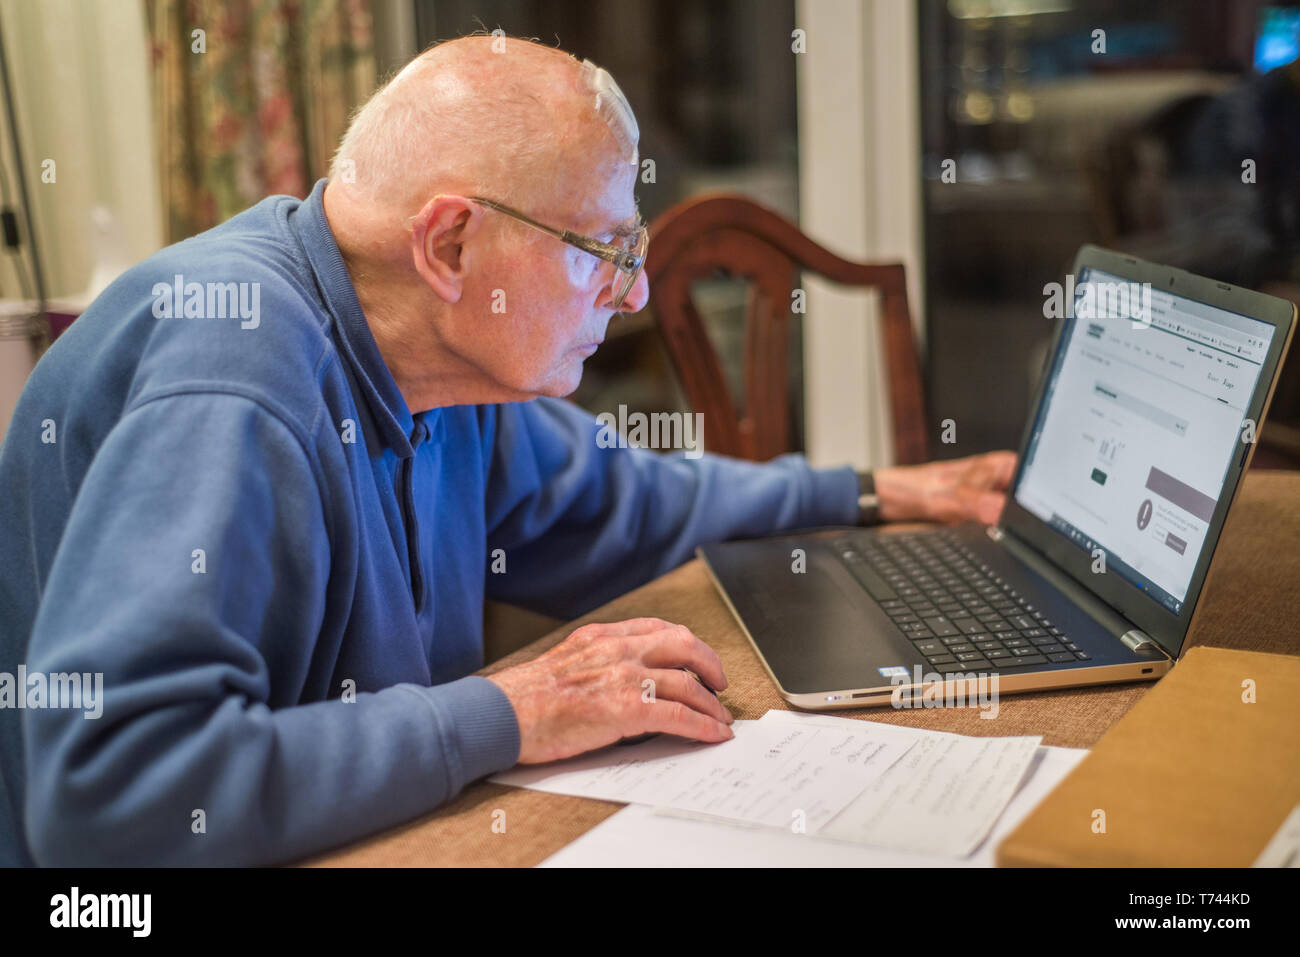 93 year old man having trouble using his computer to check his finances online,very challenging for old people. Stock Photo